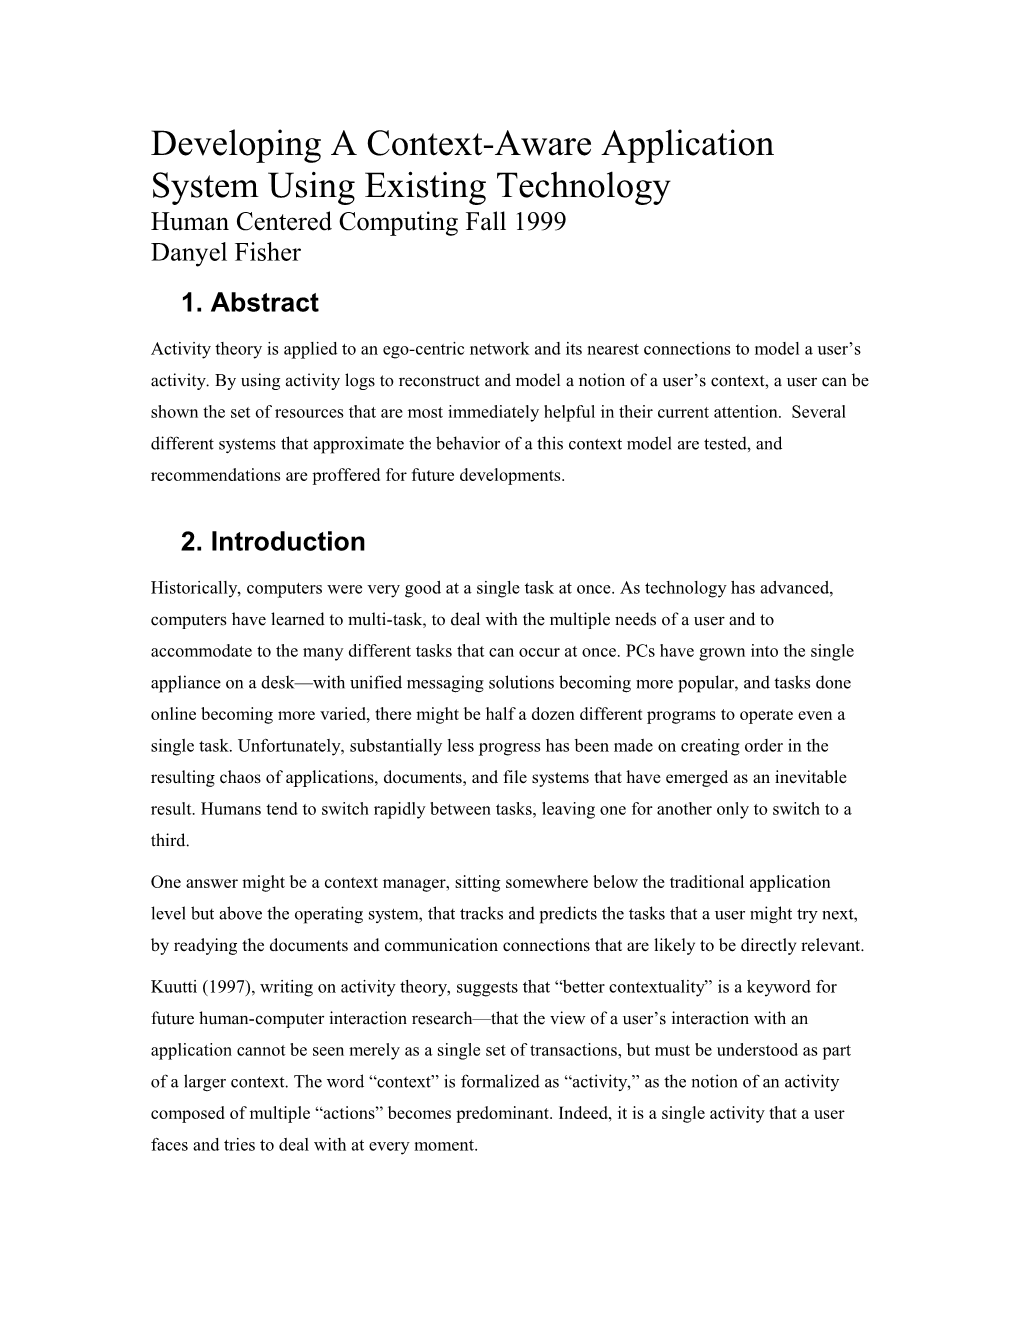 Developing a Context-Aware Application System Using Existing Technology